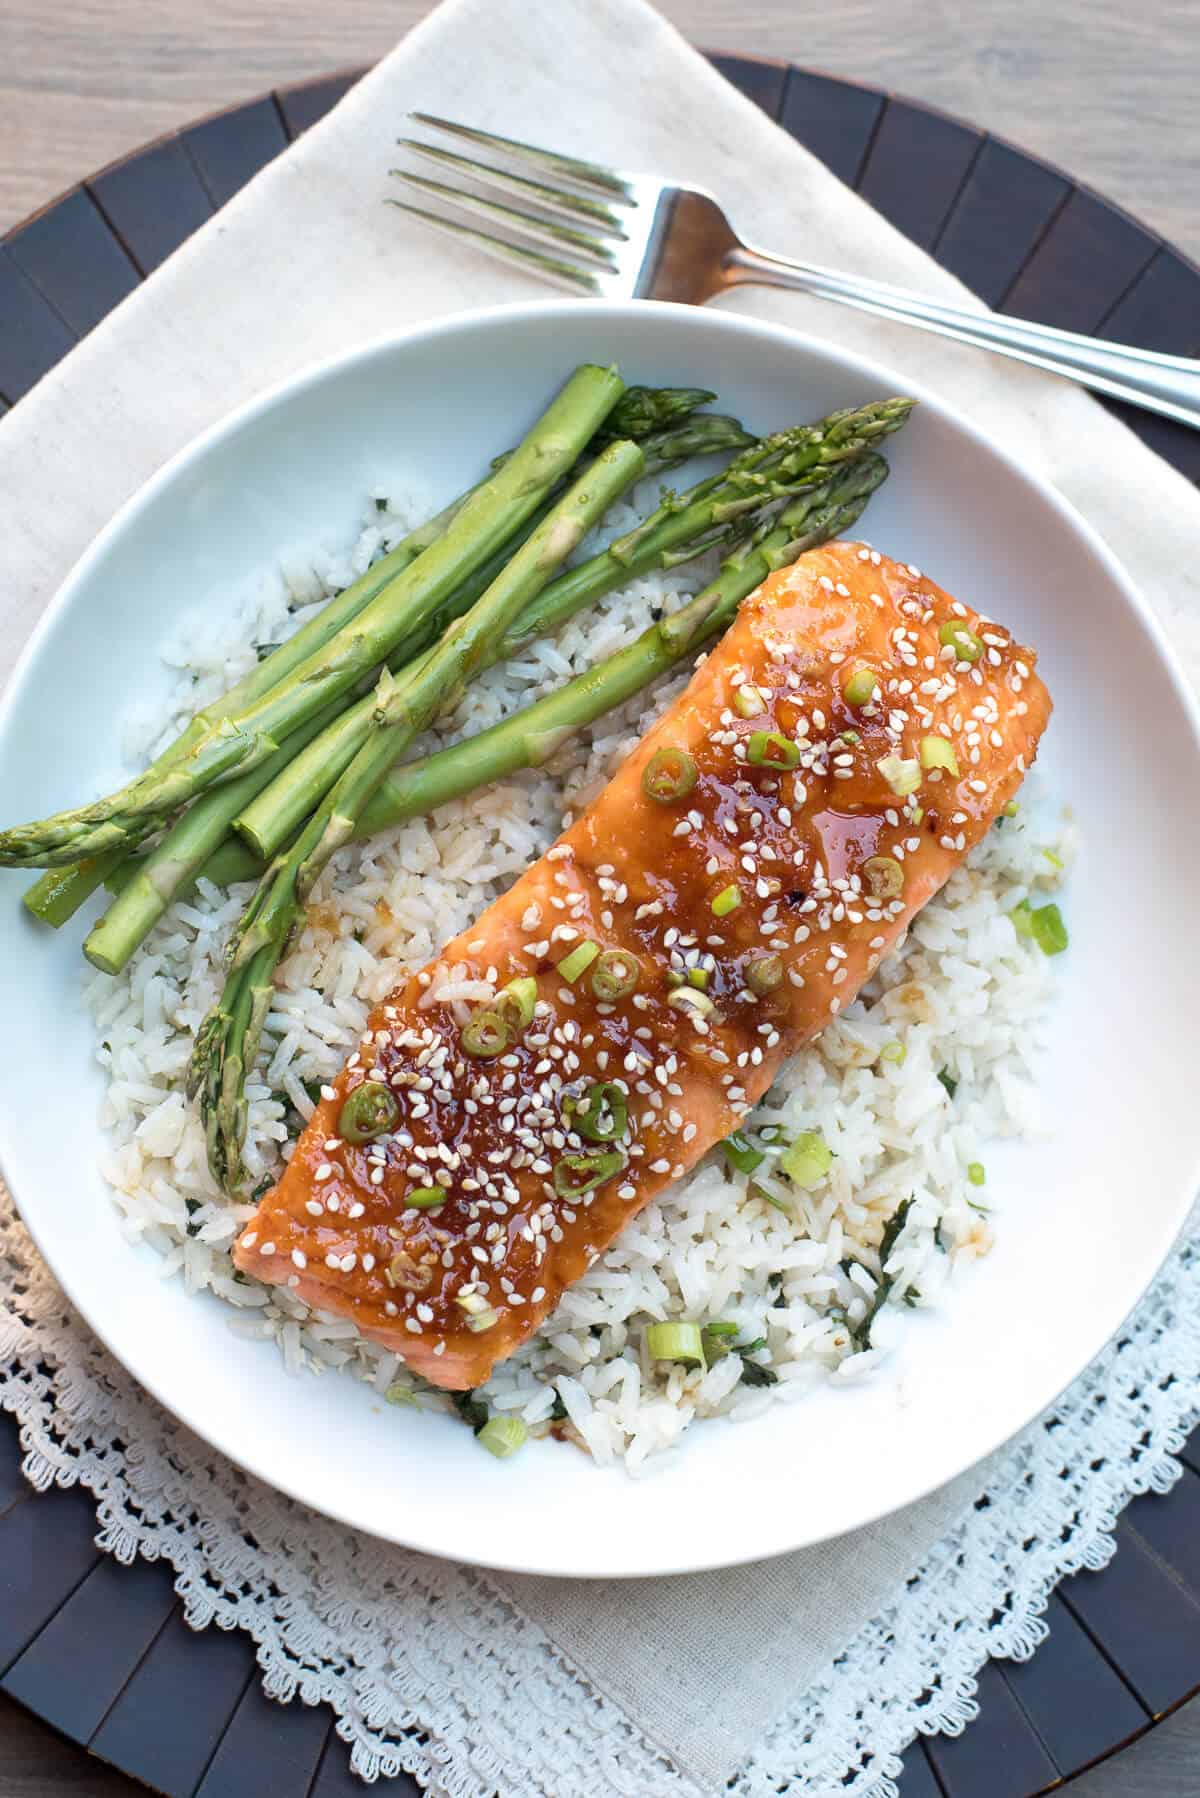 Orange Sesame Ginger Glazed Salmon on a bed of white rice with asparagus in a white bowl with a fork.